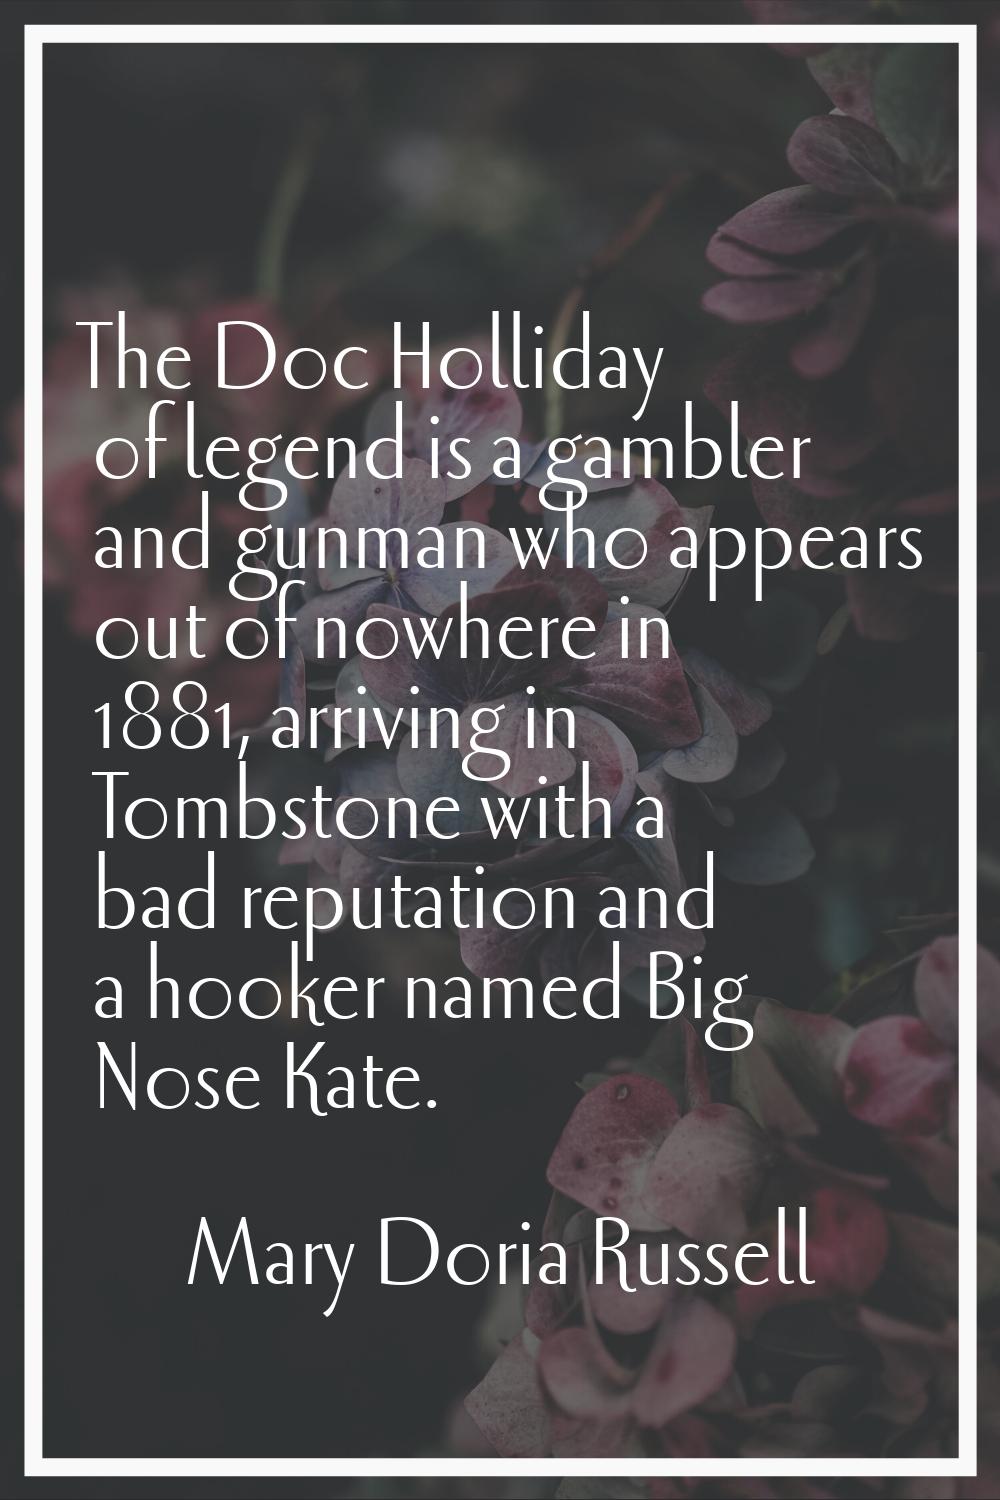 The Doc Holliday of legend is a gambler and gunman who appears out of nowhere in 1881, arriving in 